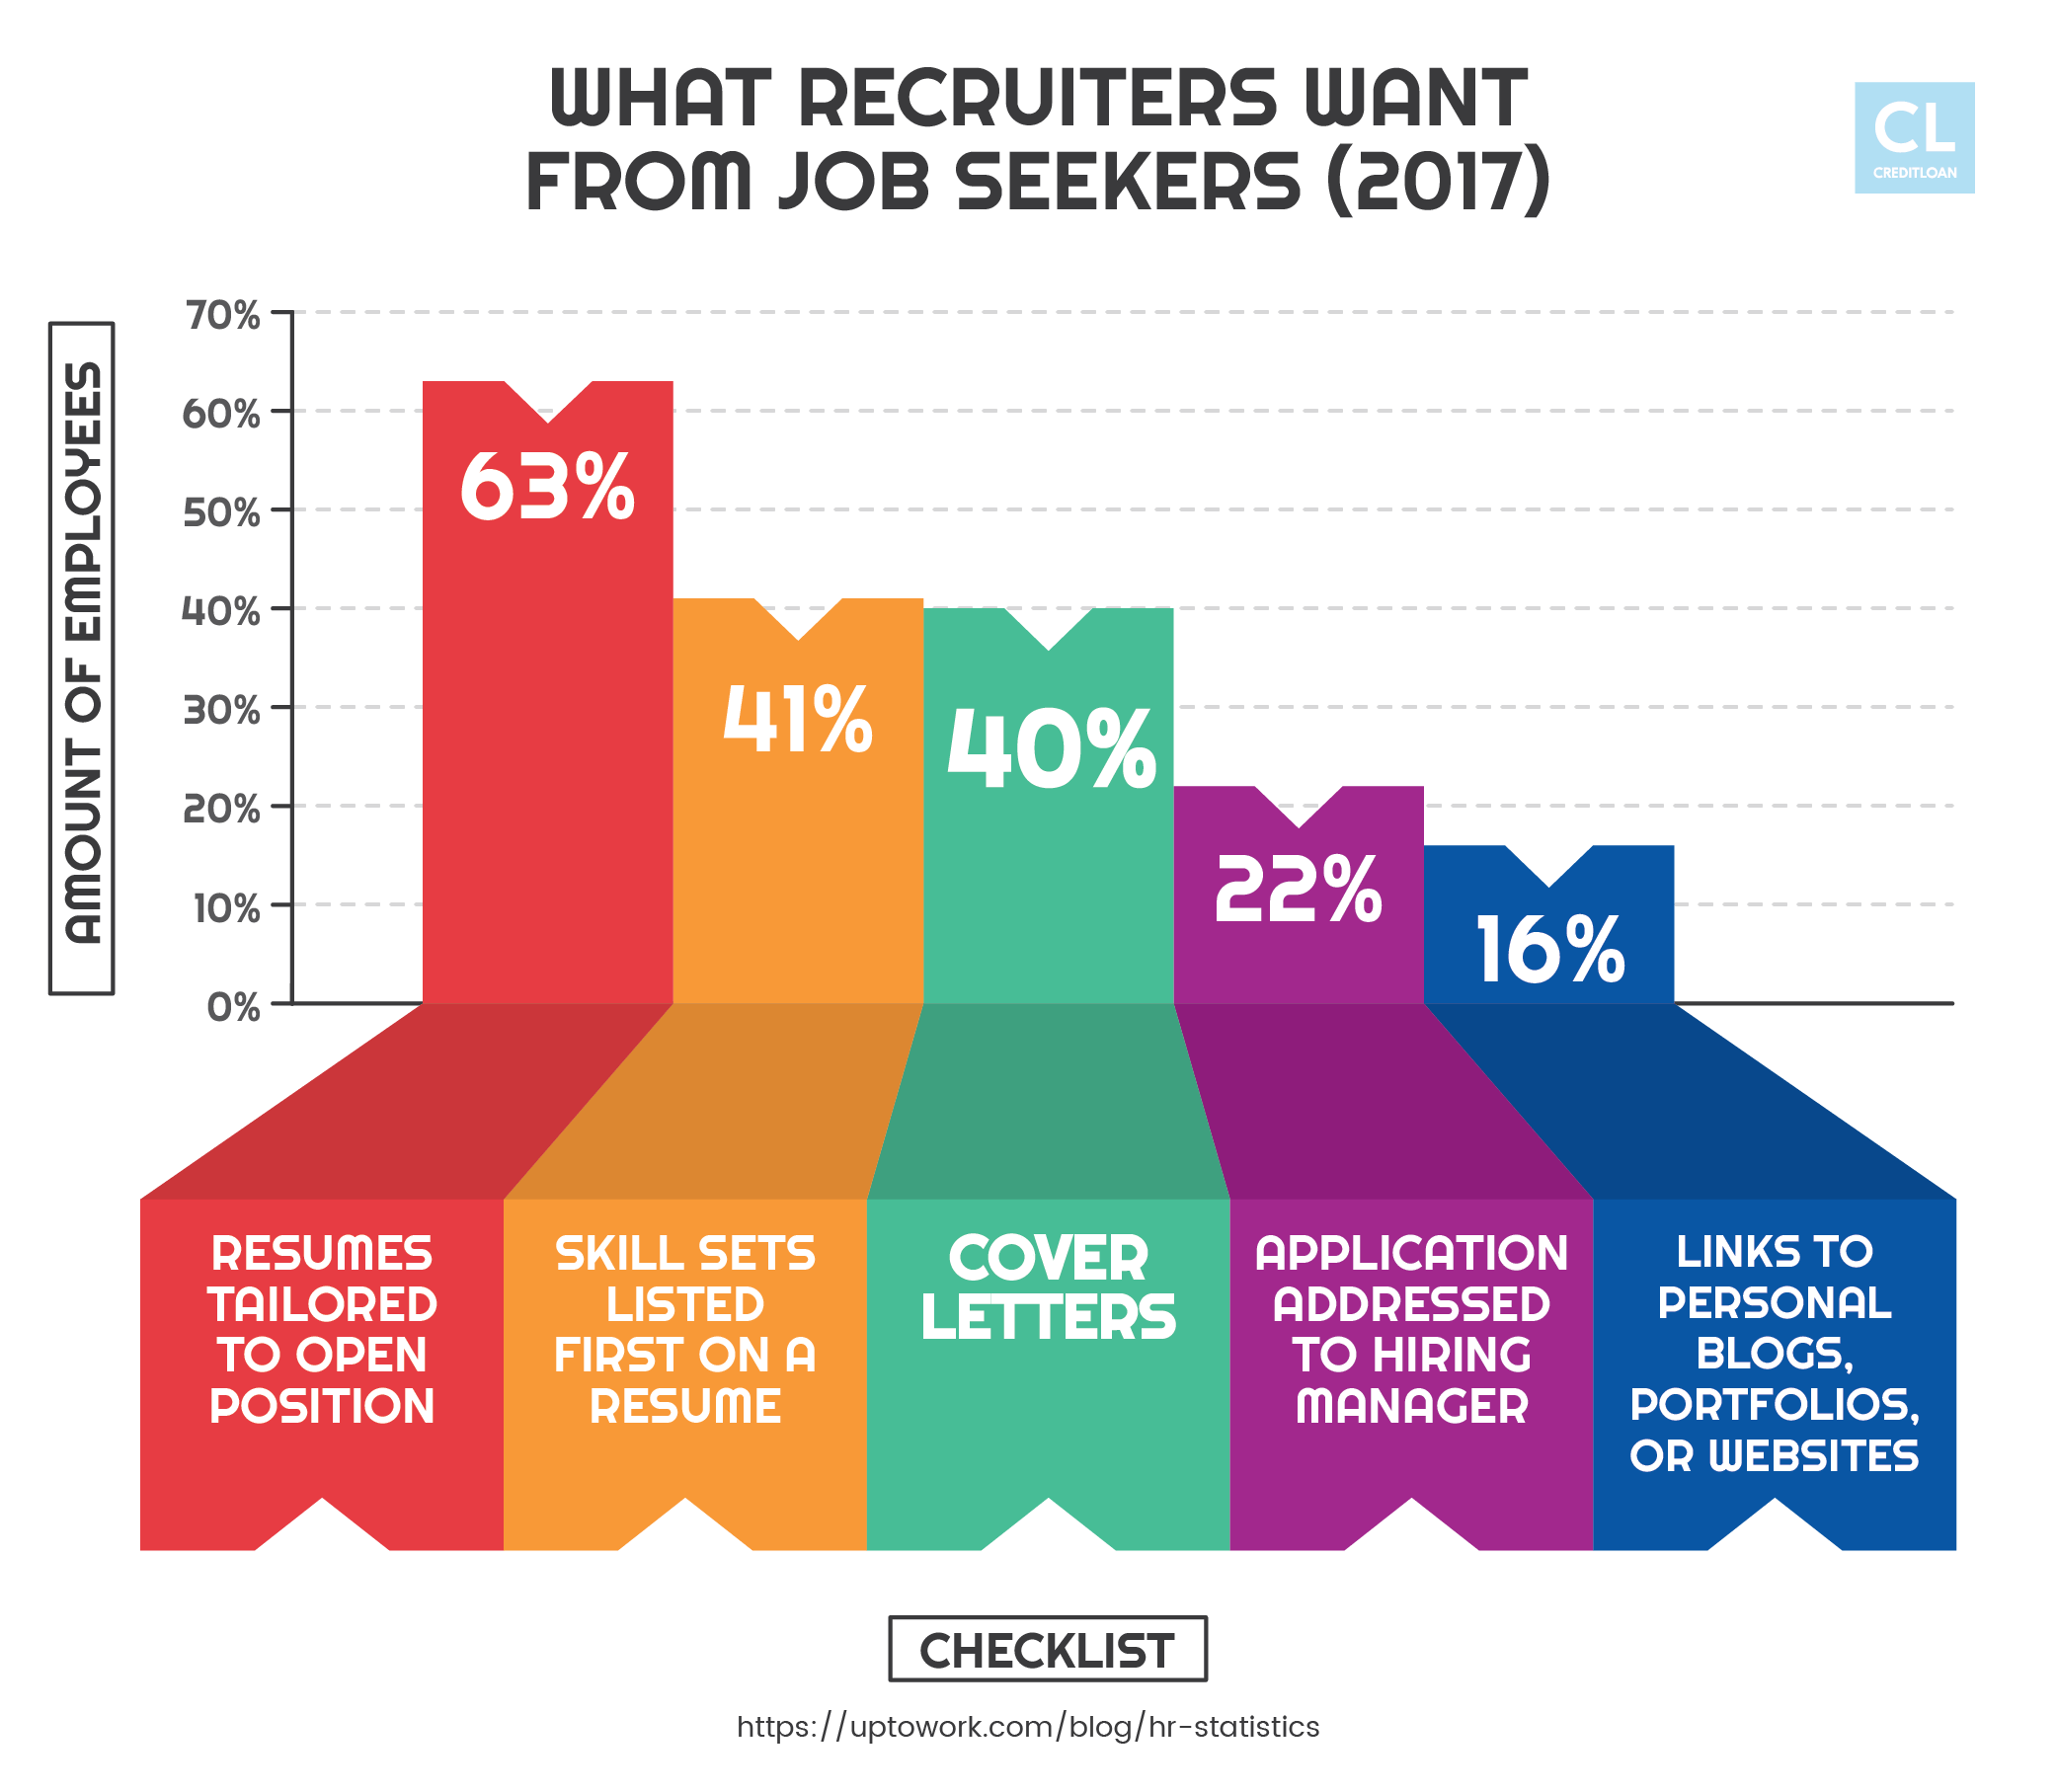 Things recruiters want from job seekers 2017